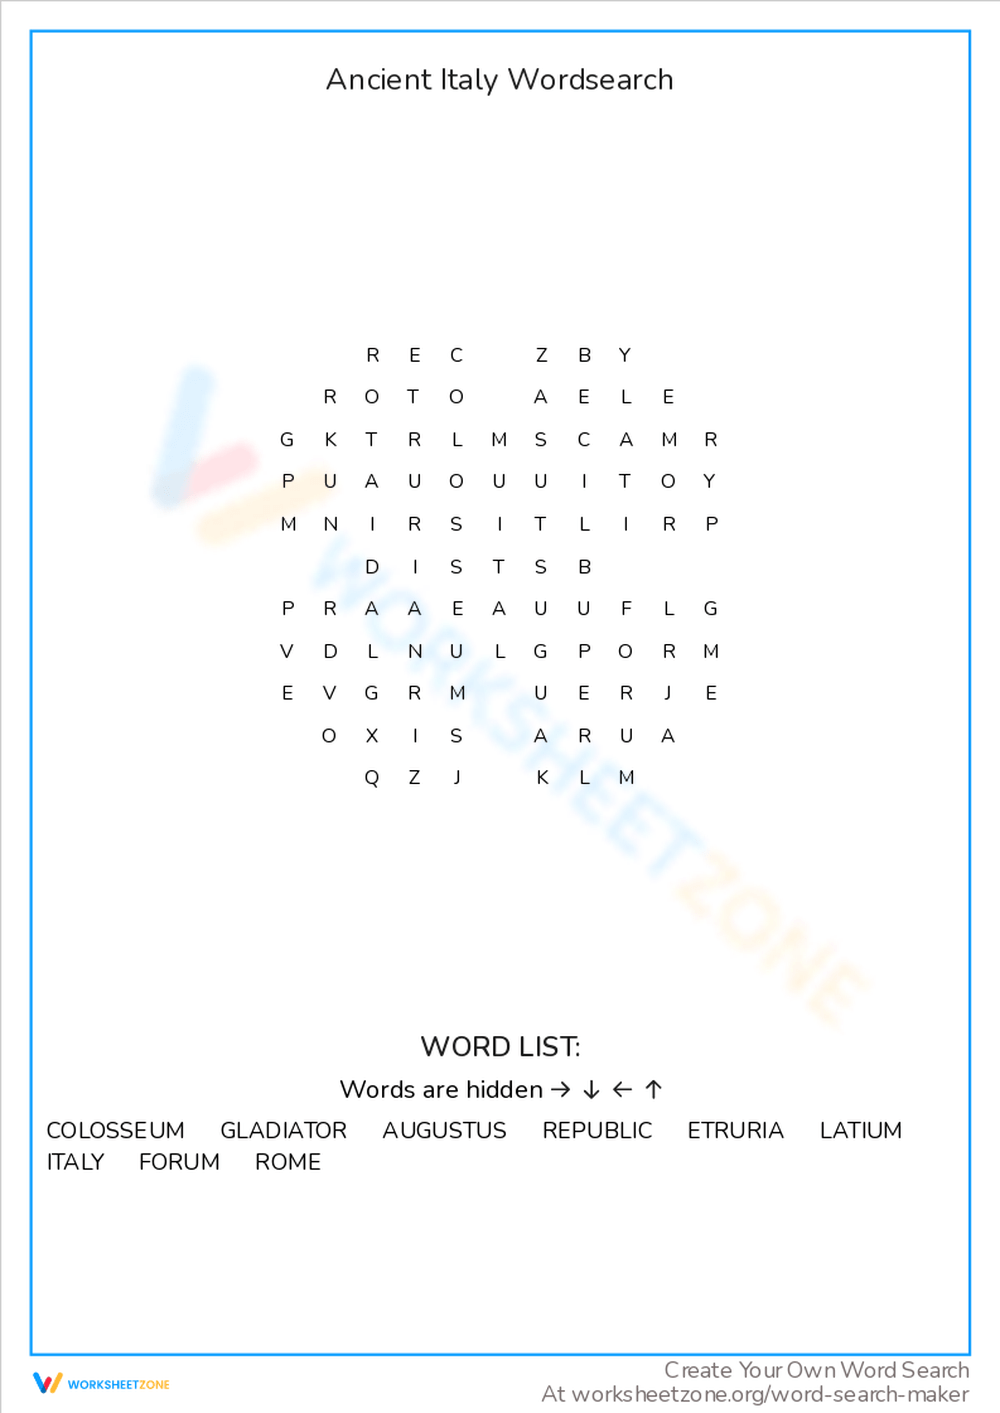 Ancient Italy Wordsearch Worksheet